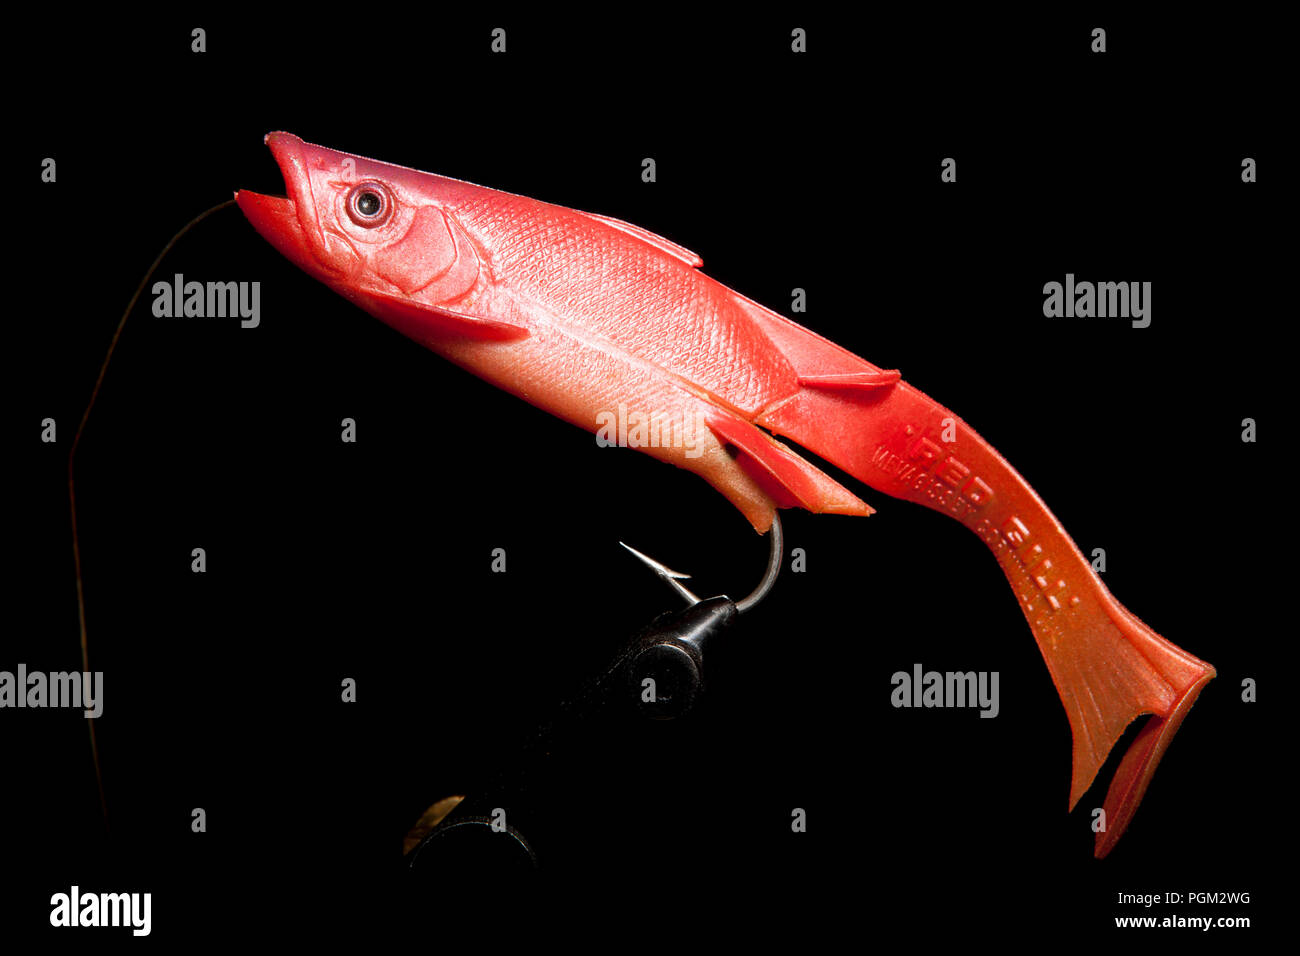 https://c8.alamy.com/comp/PGM2WG/an-old-rubber-red-gill-of-mevagissey-cornwall-sea-fishing-lure-designed-for-catching-predatory-fish-such-as-pollack-or-cod-from-a-collection-of-fishi-PGM2WG.jpg